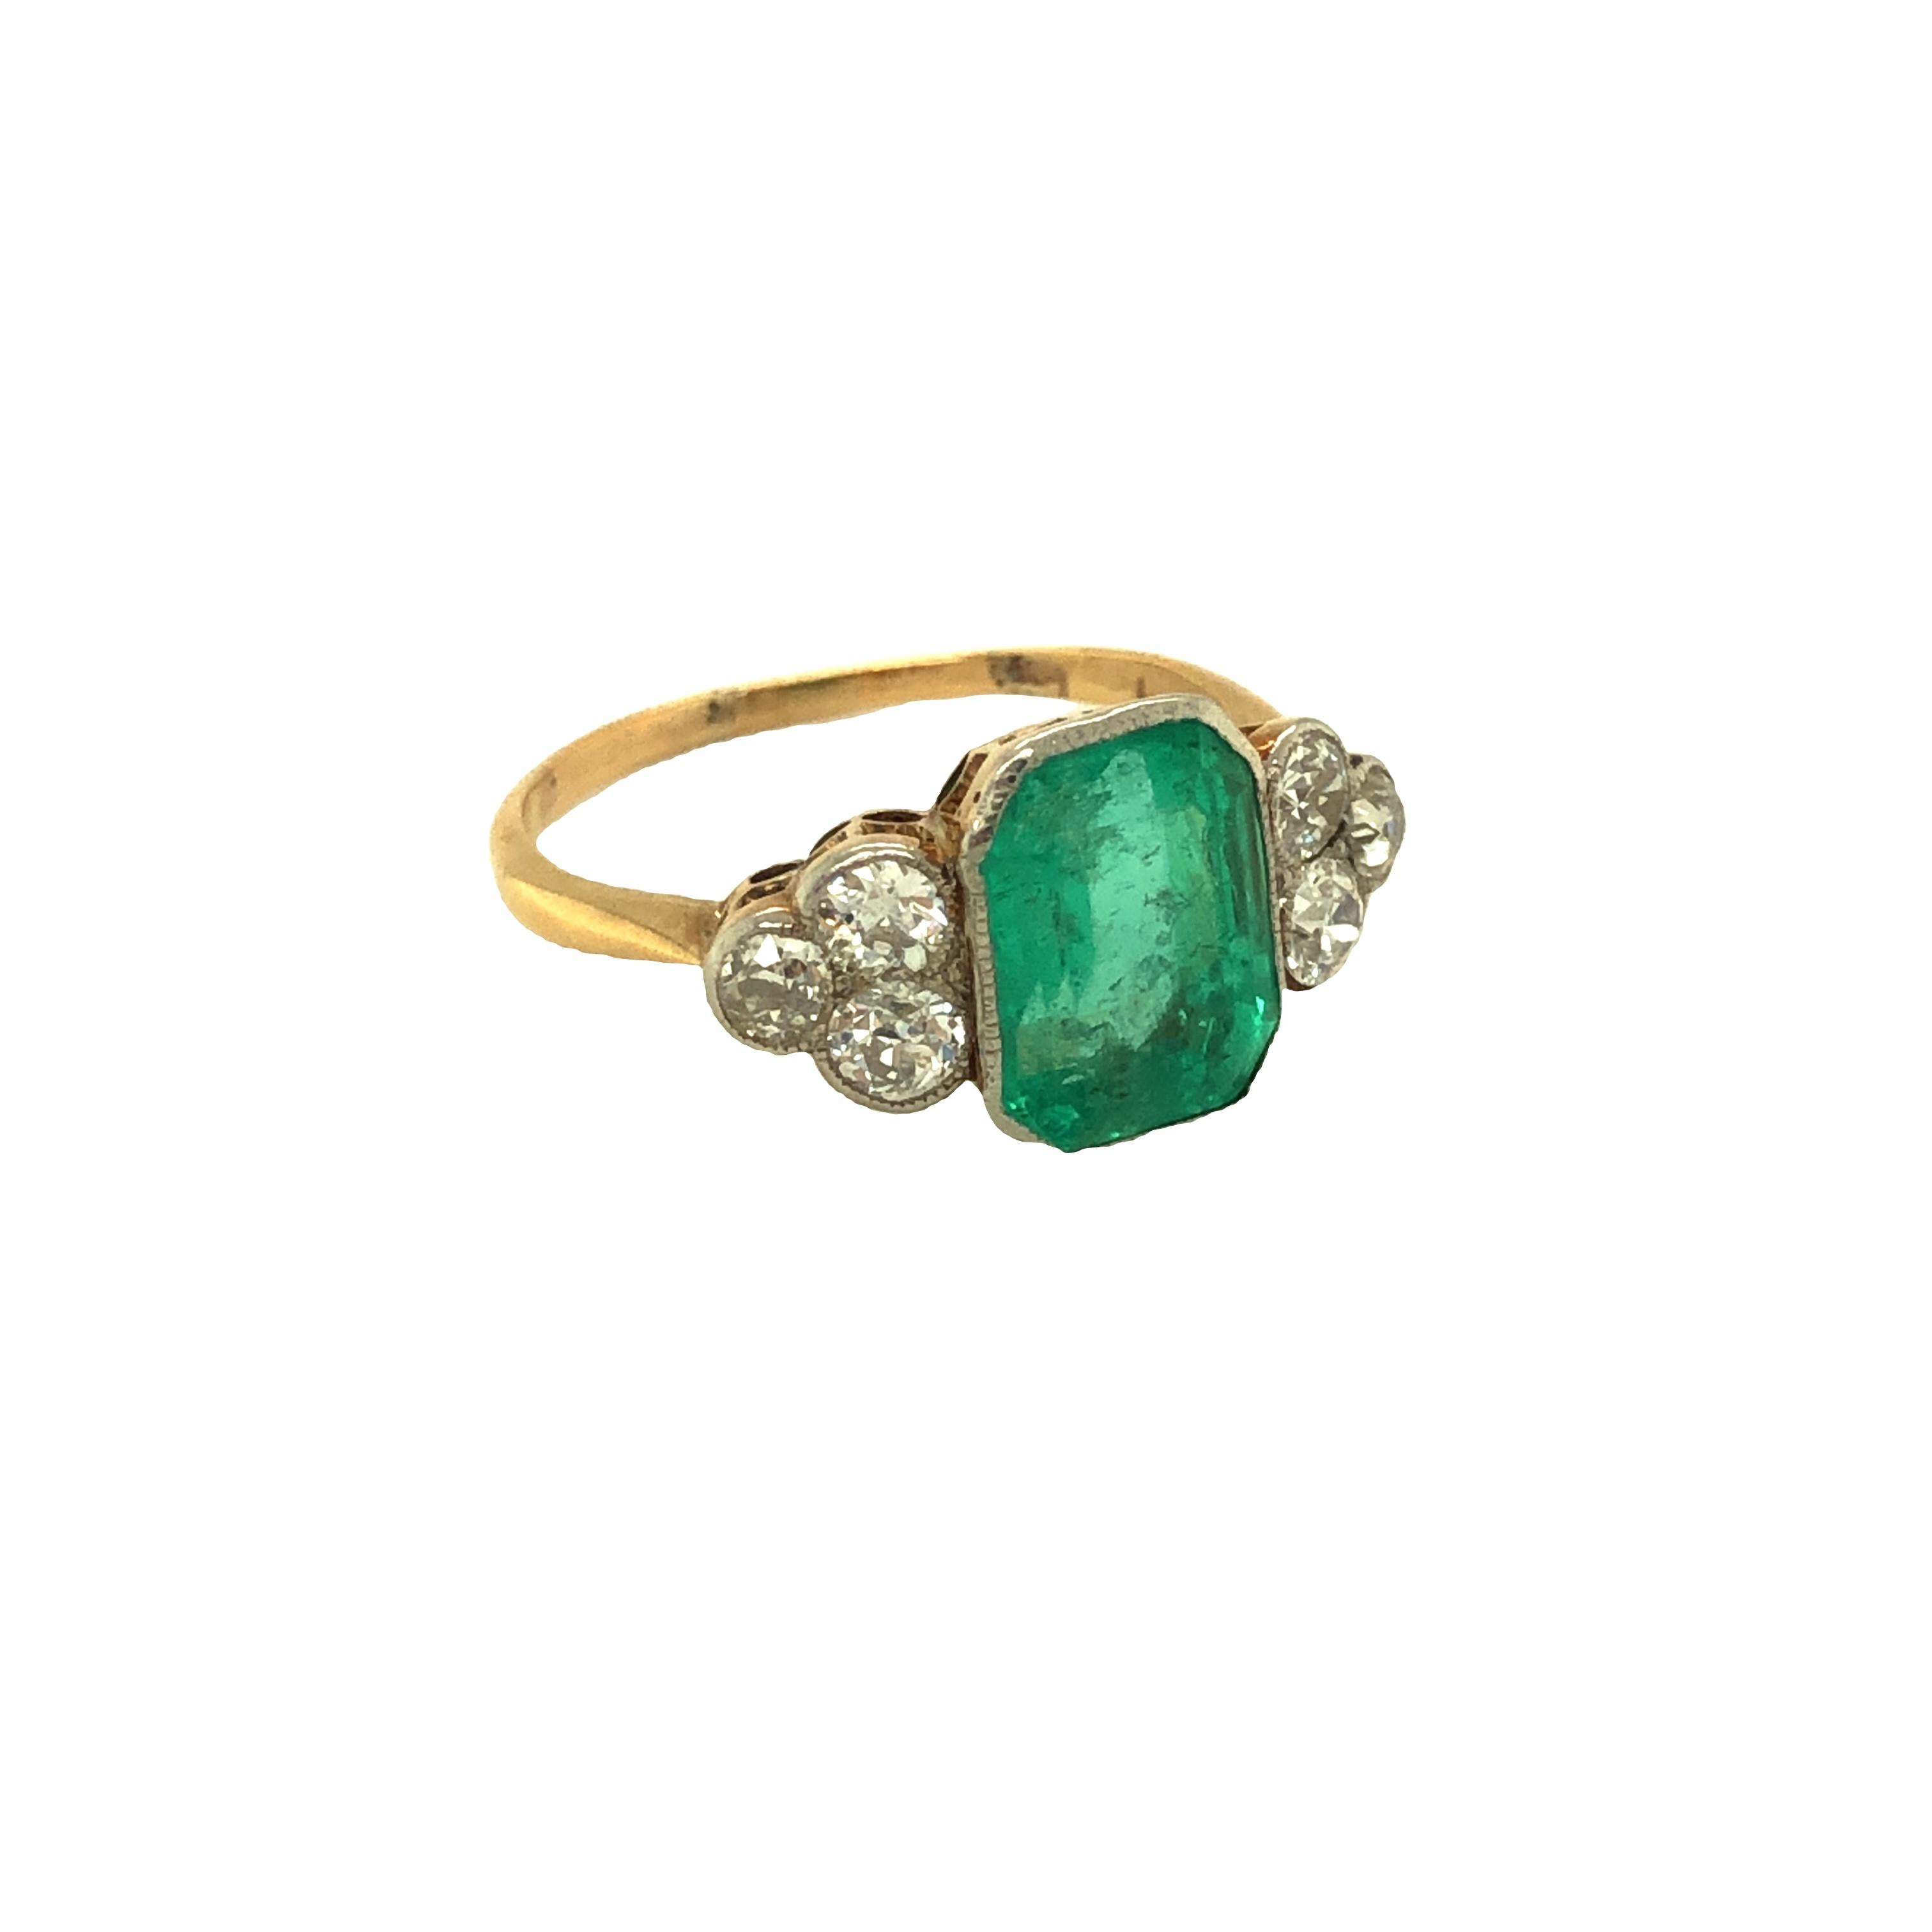 This original antique Art Deco ring features a rich green octagonal step-cut emerald, weighing approximately 3 carats (9.45 x 7.20 x 5.12 mm).  The ring has milgrain detail on each side and is flanked by three (3) old European cut diamonds on each